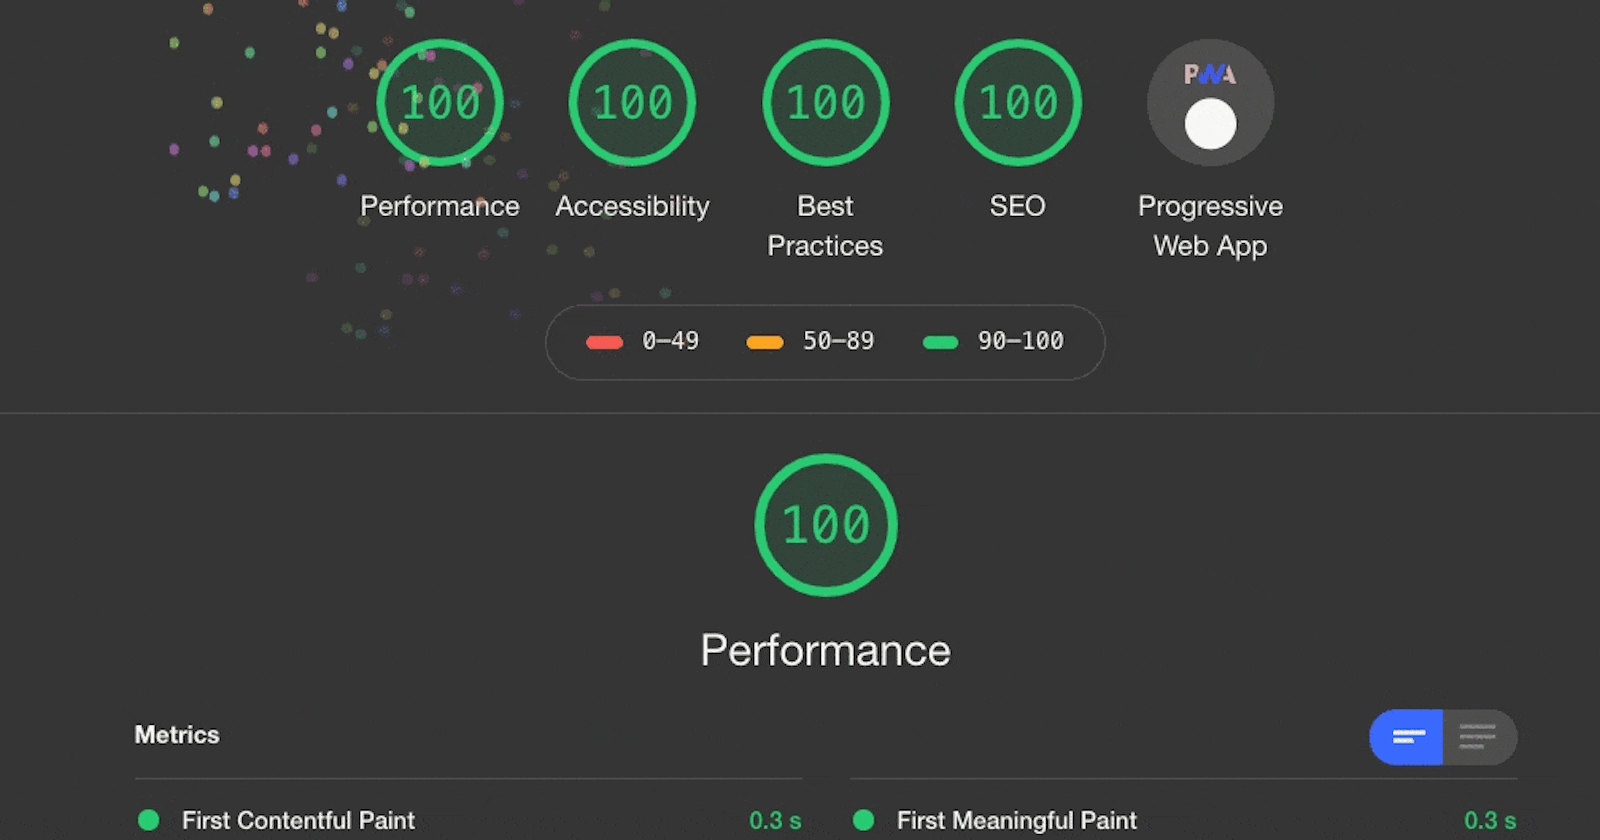 How my website loads in less than 2 seconds 😎